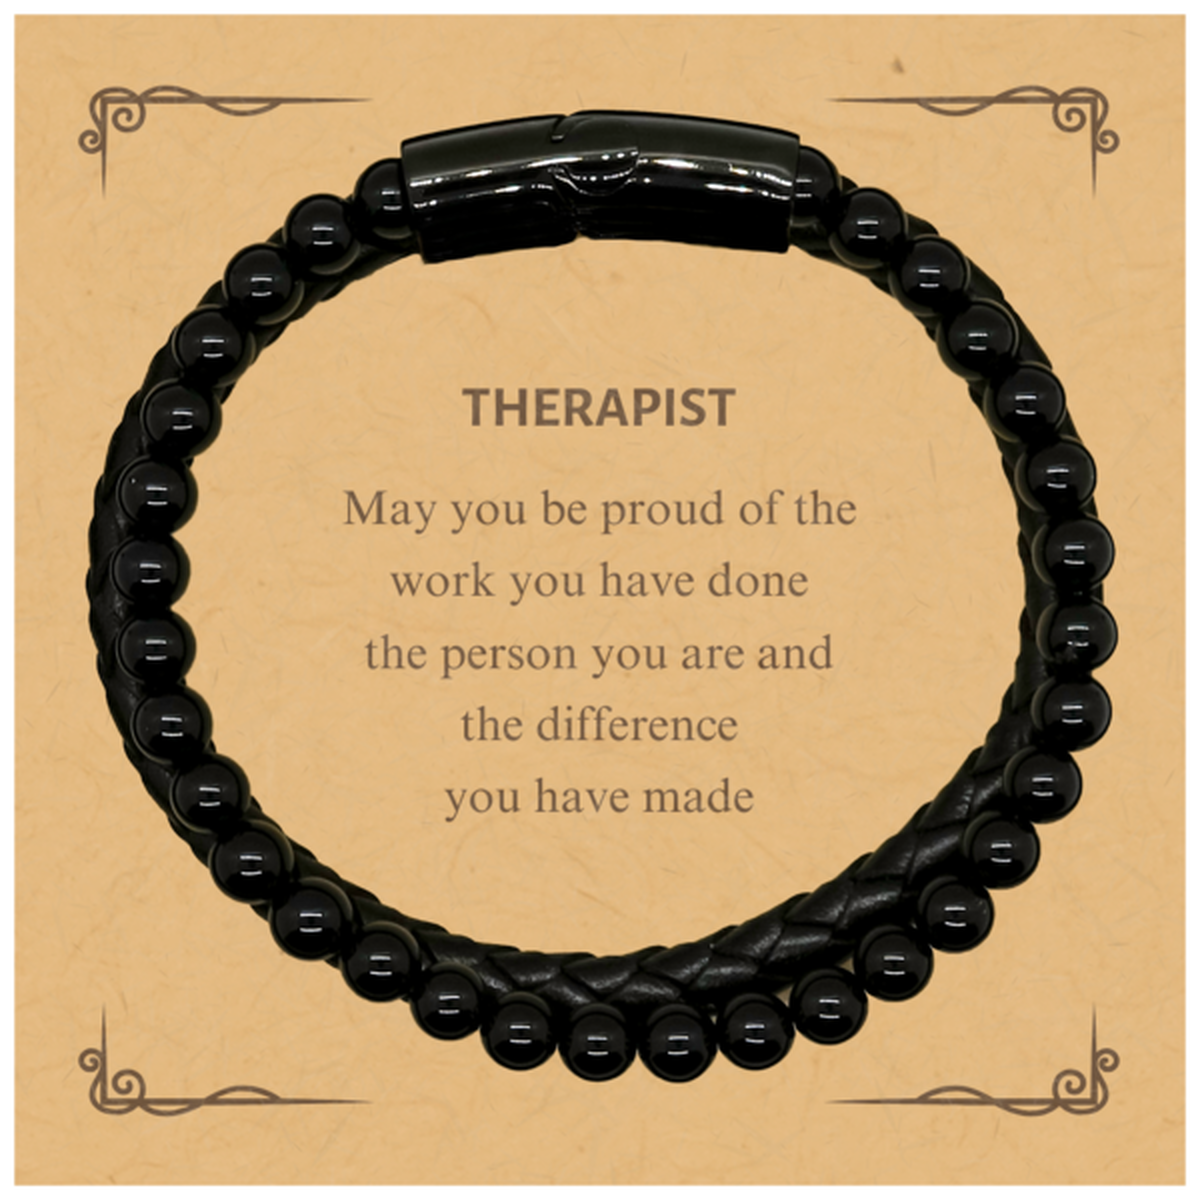 Therapist May you be proud of the work you have done, Retirement Therapist Stone Leather Bracelets for Colleague Appreciation Gifts Amazing for Therapist